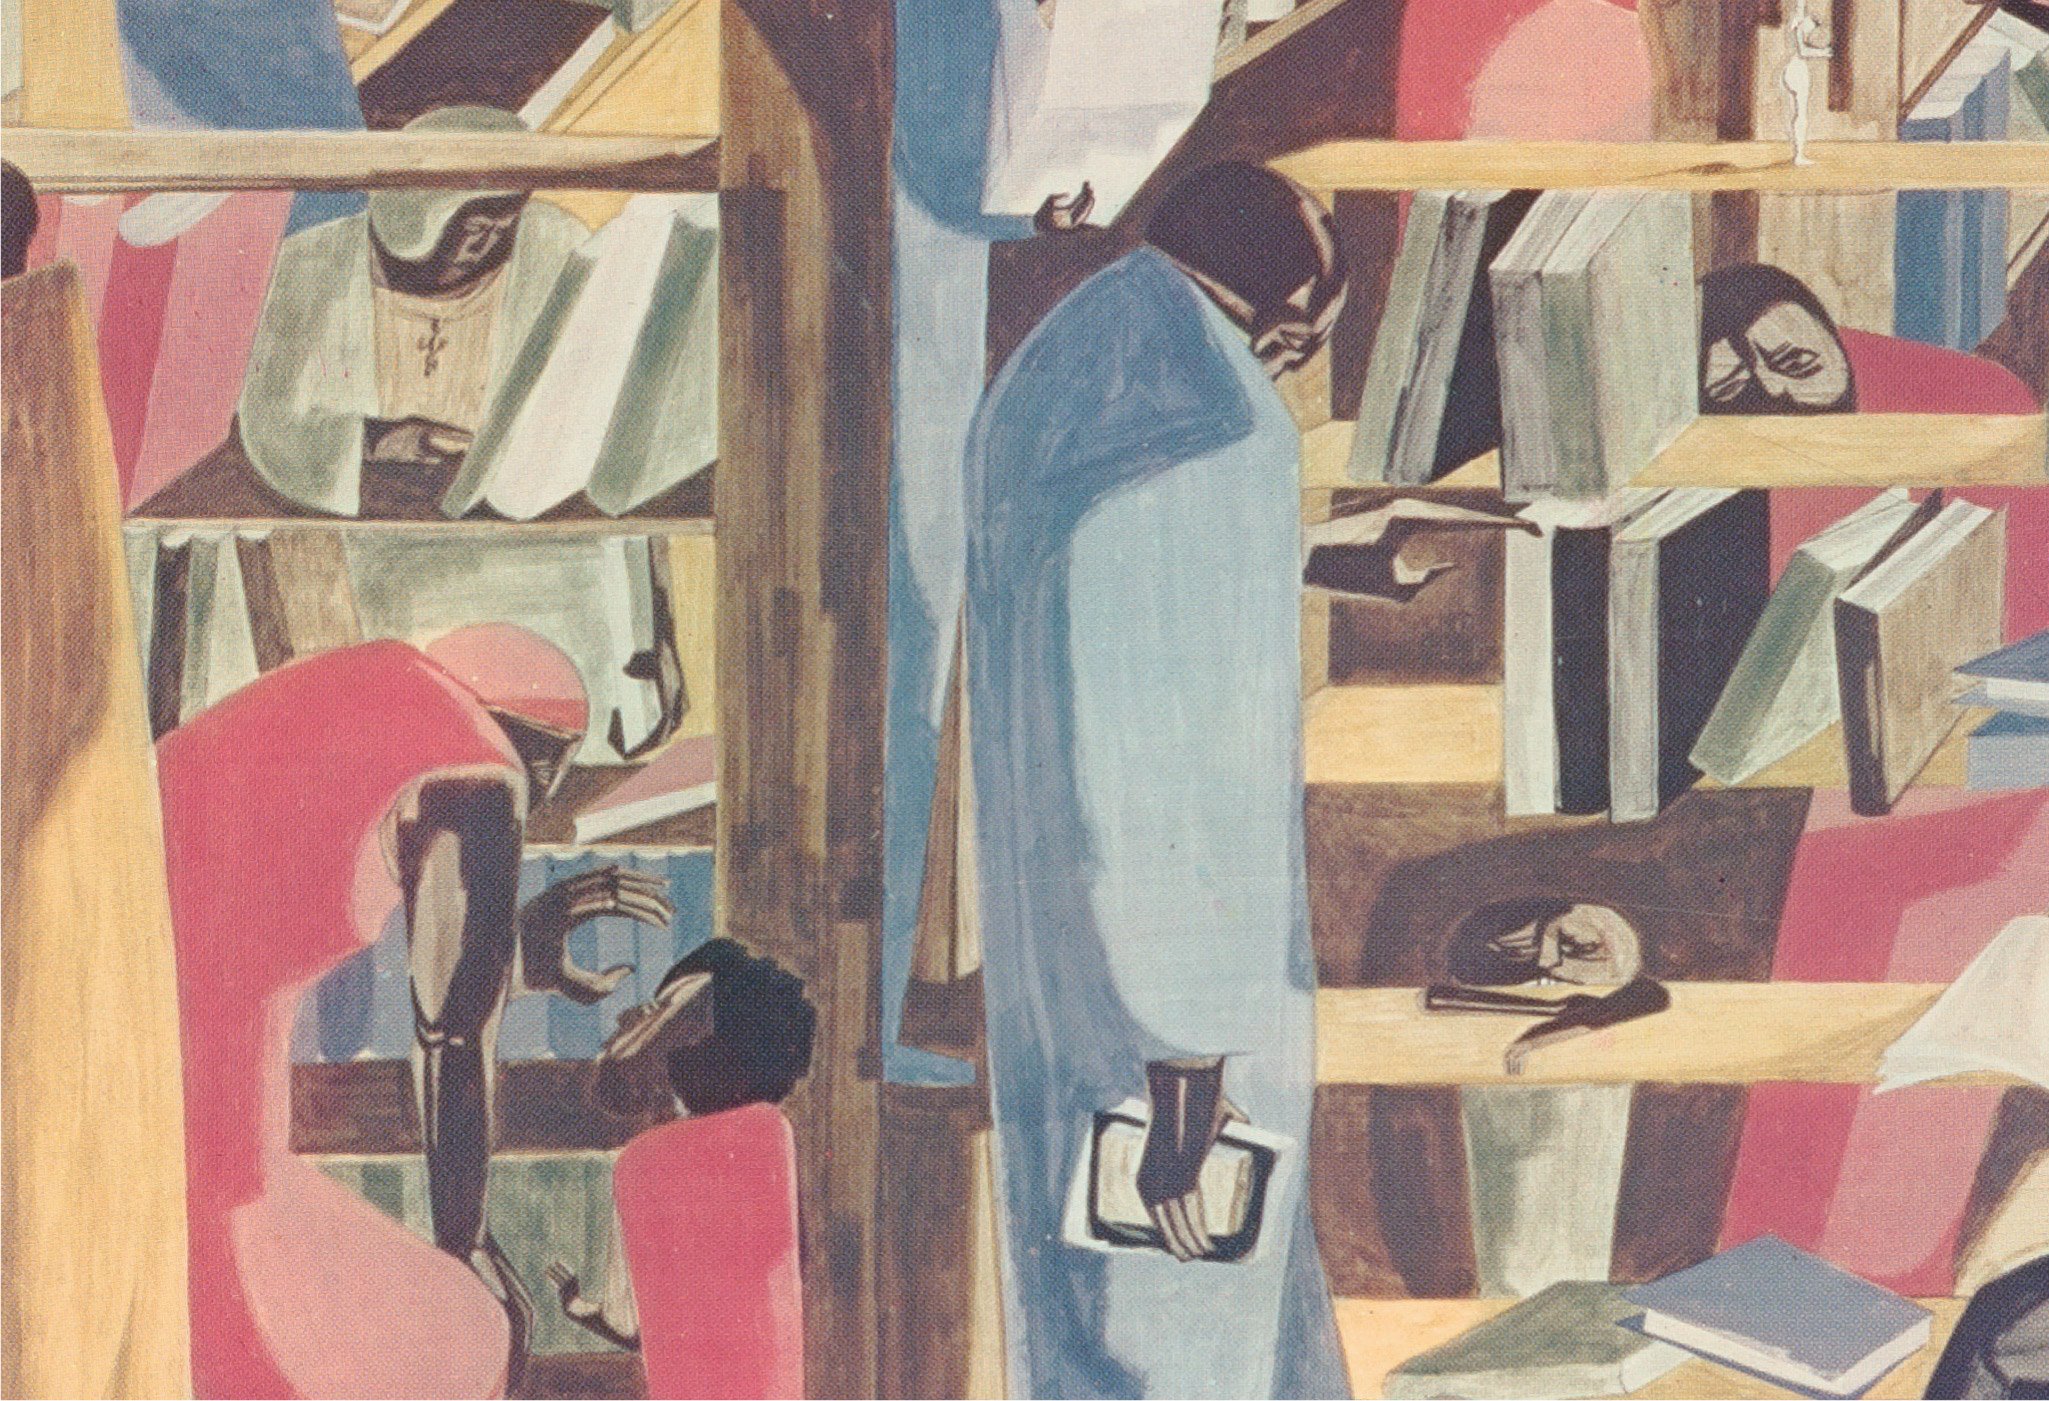 A Selection of African American Art and Artists’ Books